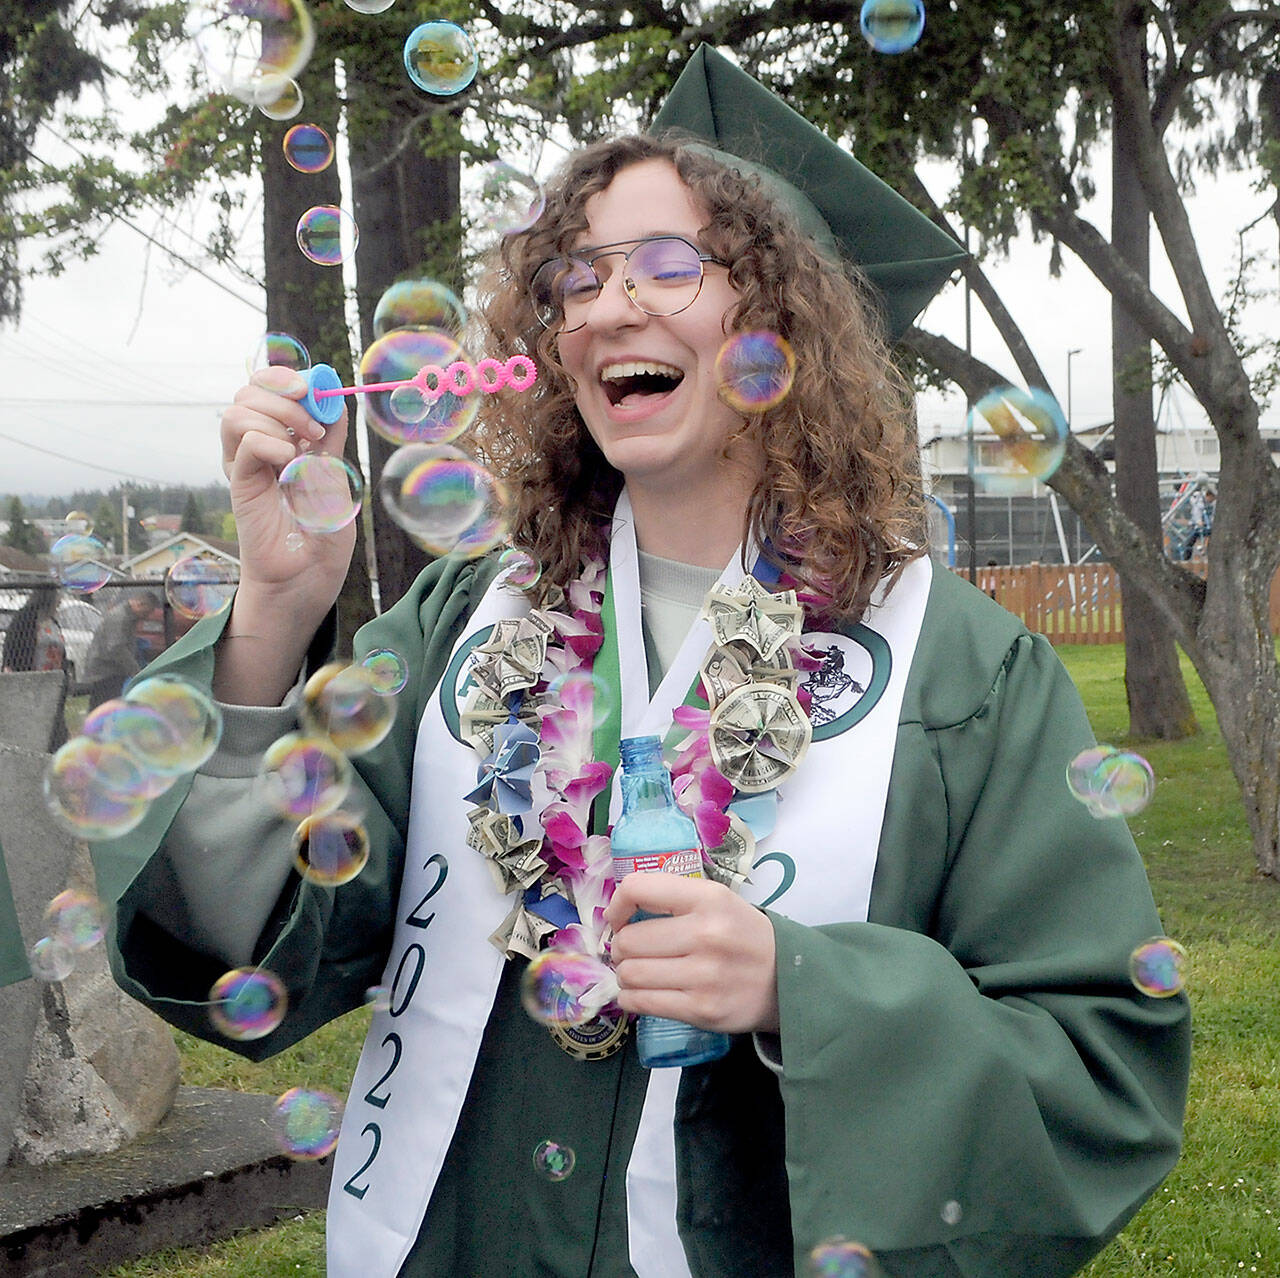 Port Angeles High School graduate Sage Hunter blows bubbles prior to Friday’s commencement ceremony at Port Angeles Civic Field. A total of 236 seniors made up the school’s Class of 2022. (Keith Thorpe/Peninsula Daily News)